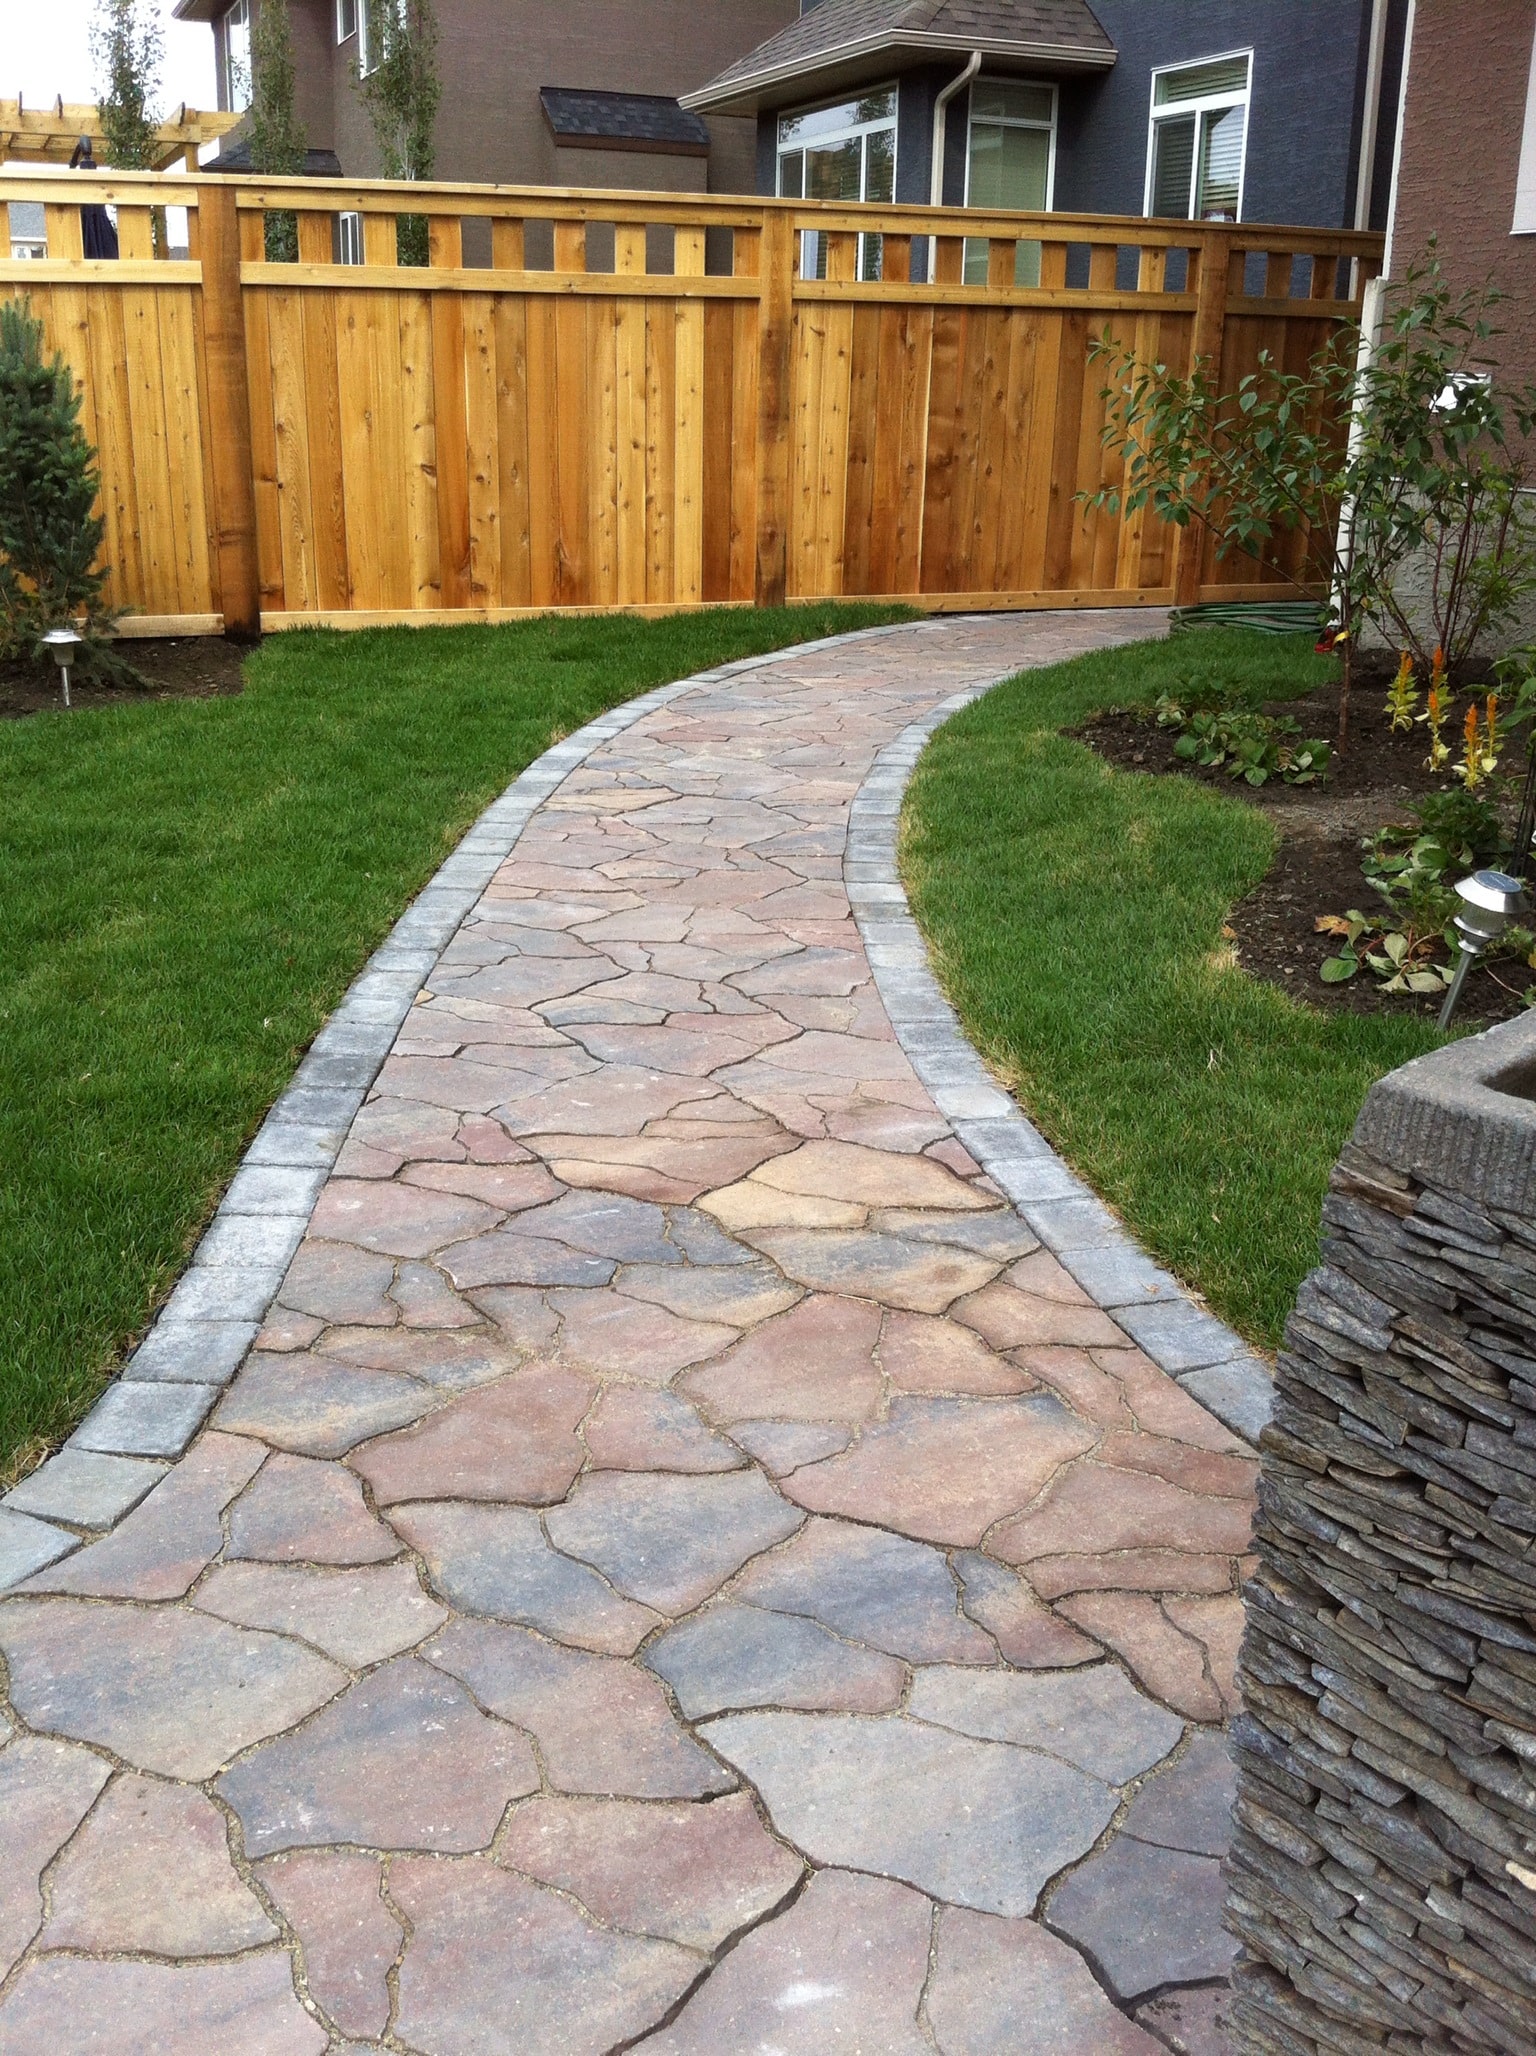 paver-stones-walkway-and-fence-build